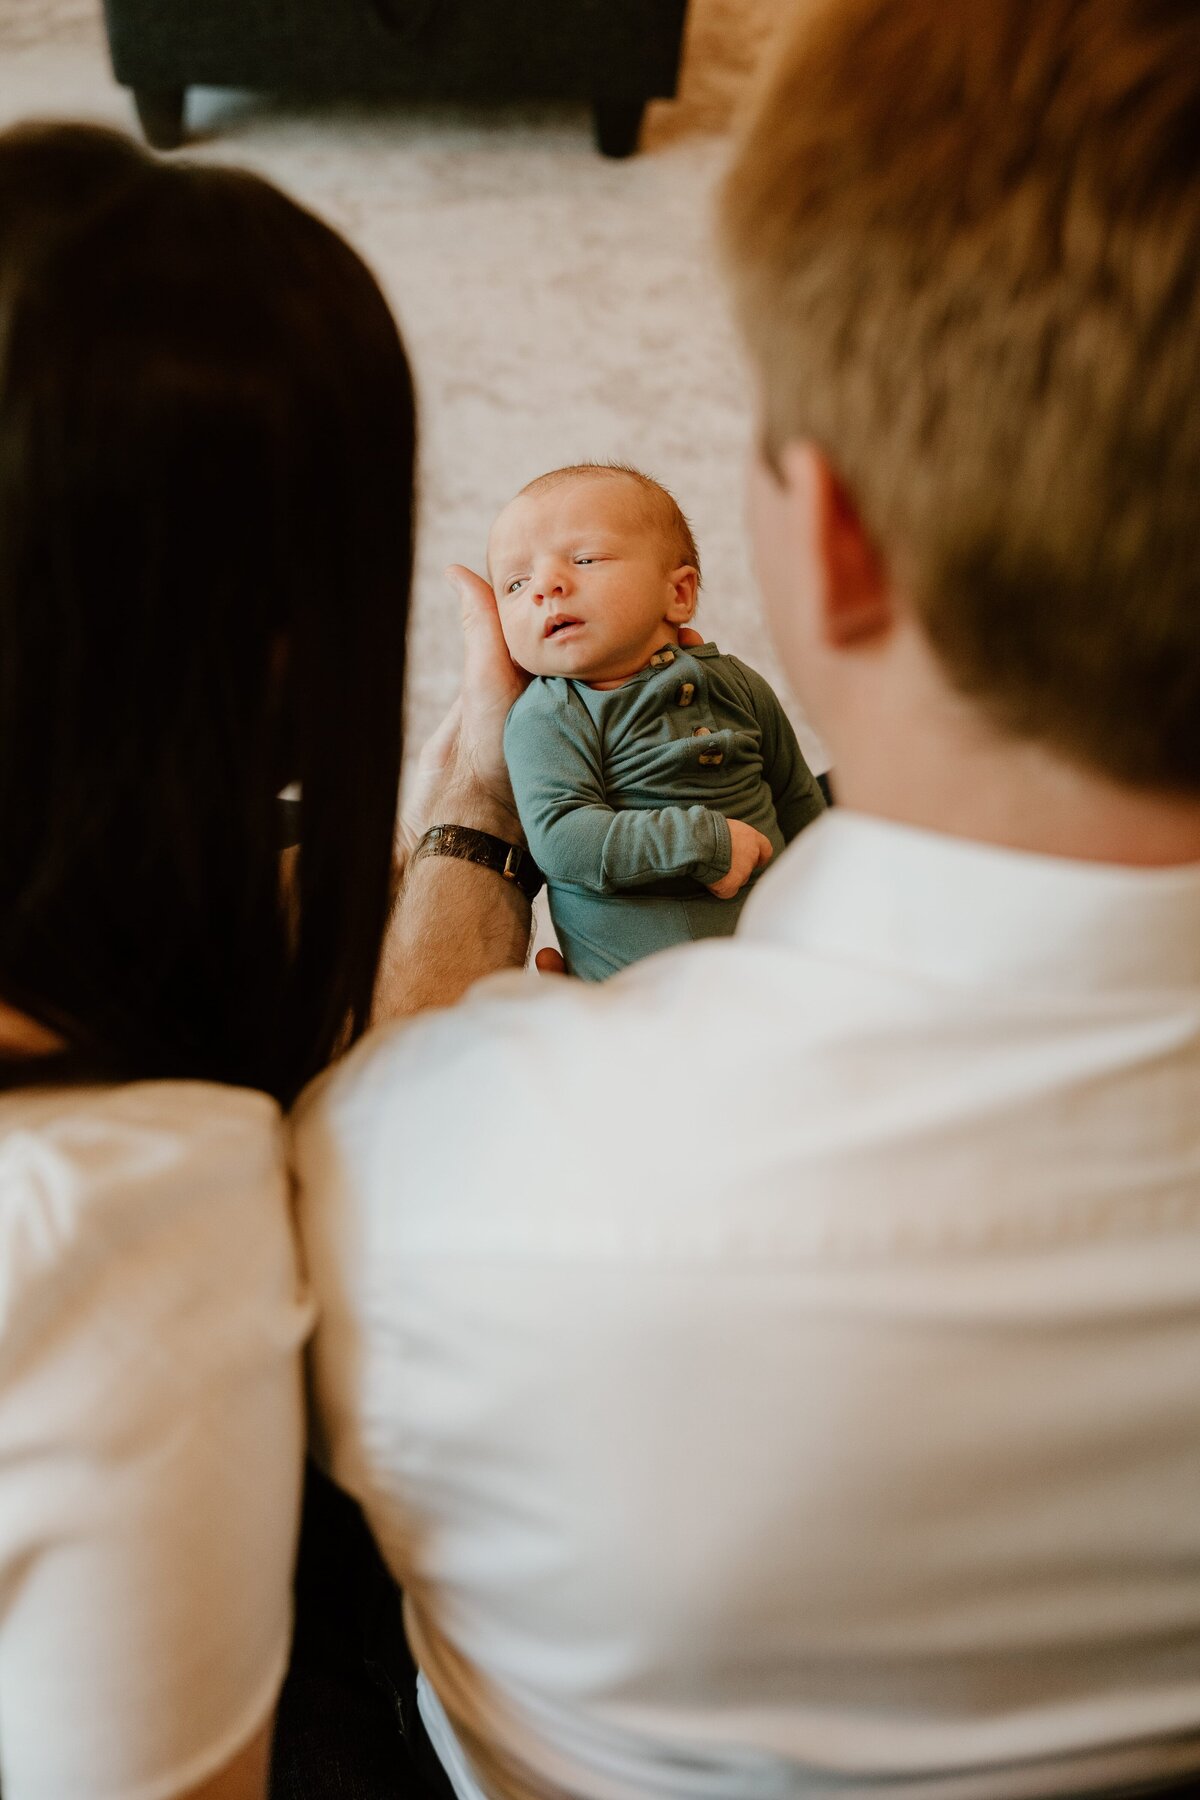 A newborn baby dressed in a green onesie is gently held and admired by his parents, with the focus on his tiny face as he gazes back, framed by the out-of-focus profiles of his mother and father.